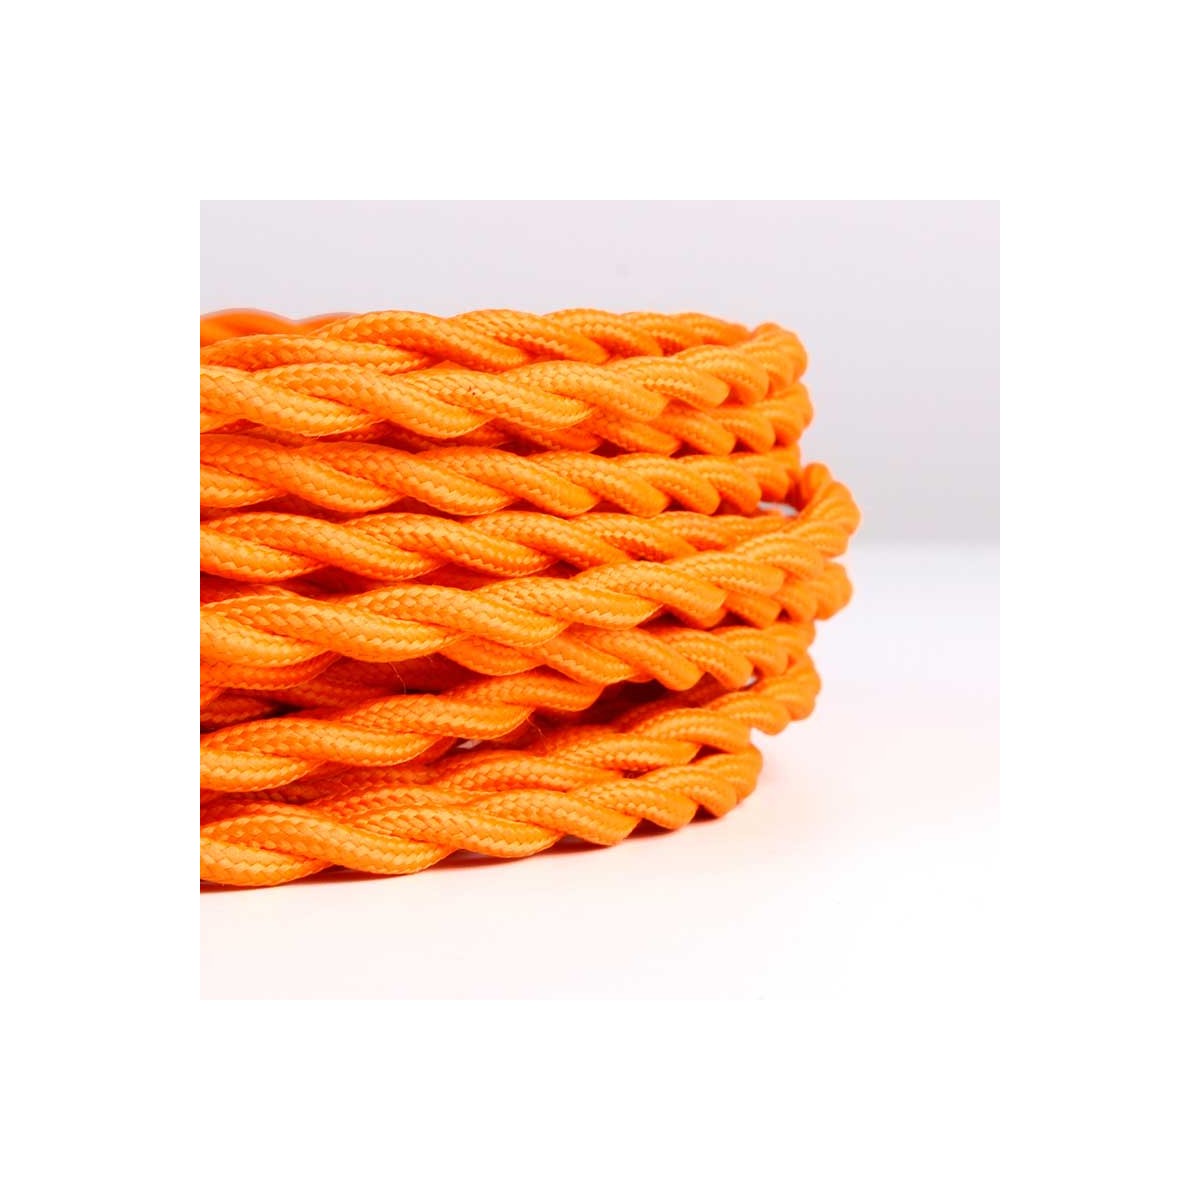 Cable covered with an orange colored soy effect fabric